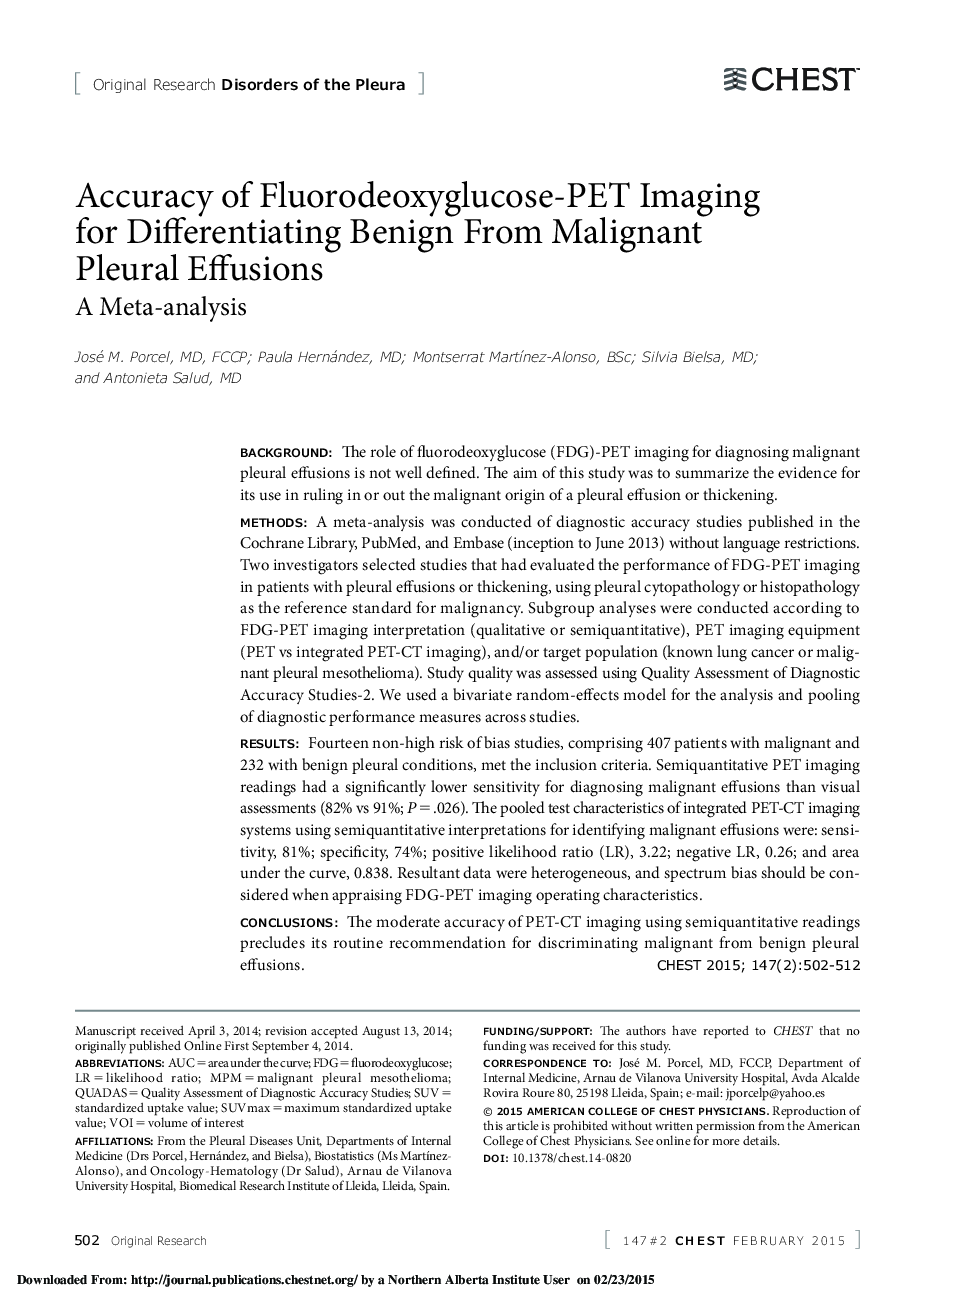 Accuracy of Fluorodeoxyglucose-PET Imaging for Differentiating Benign From Malignant Pleural Effusions